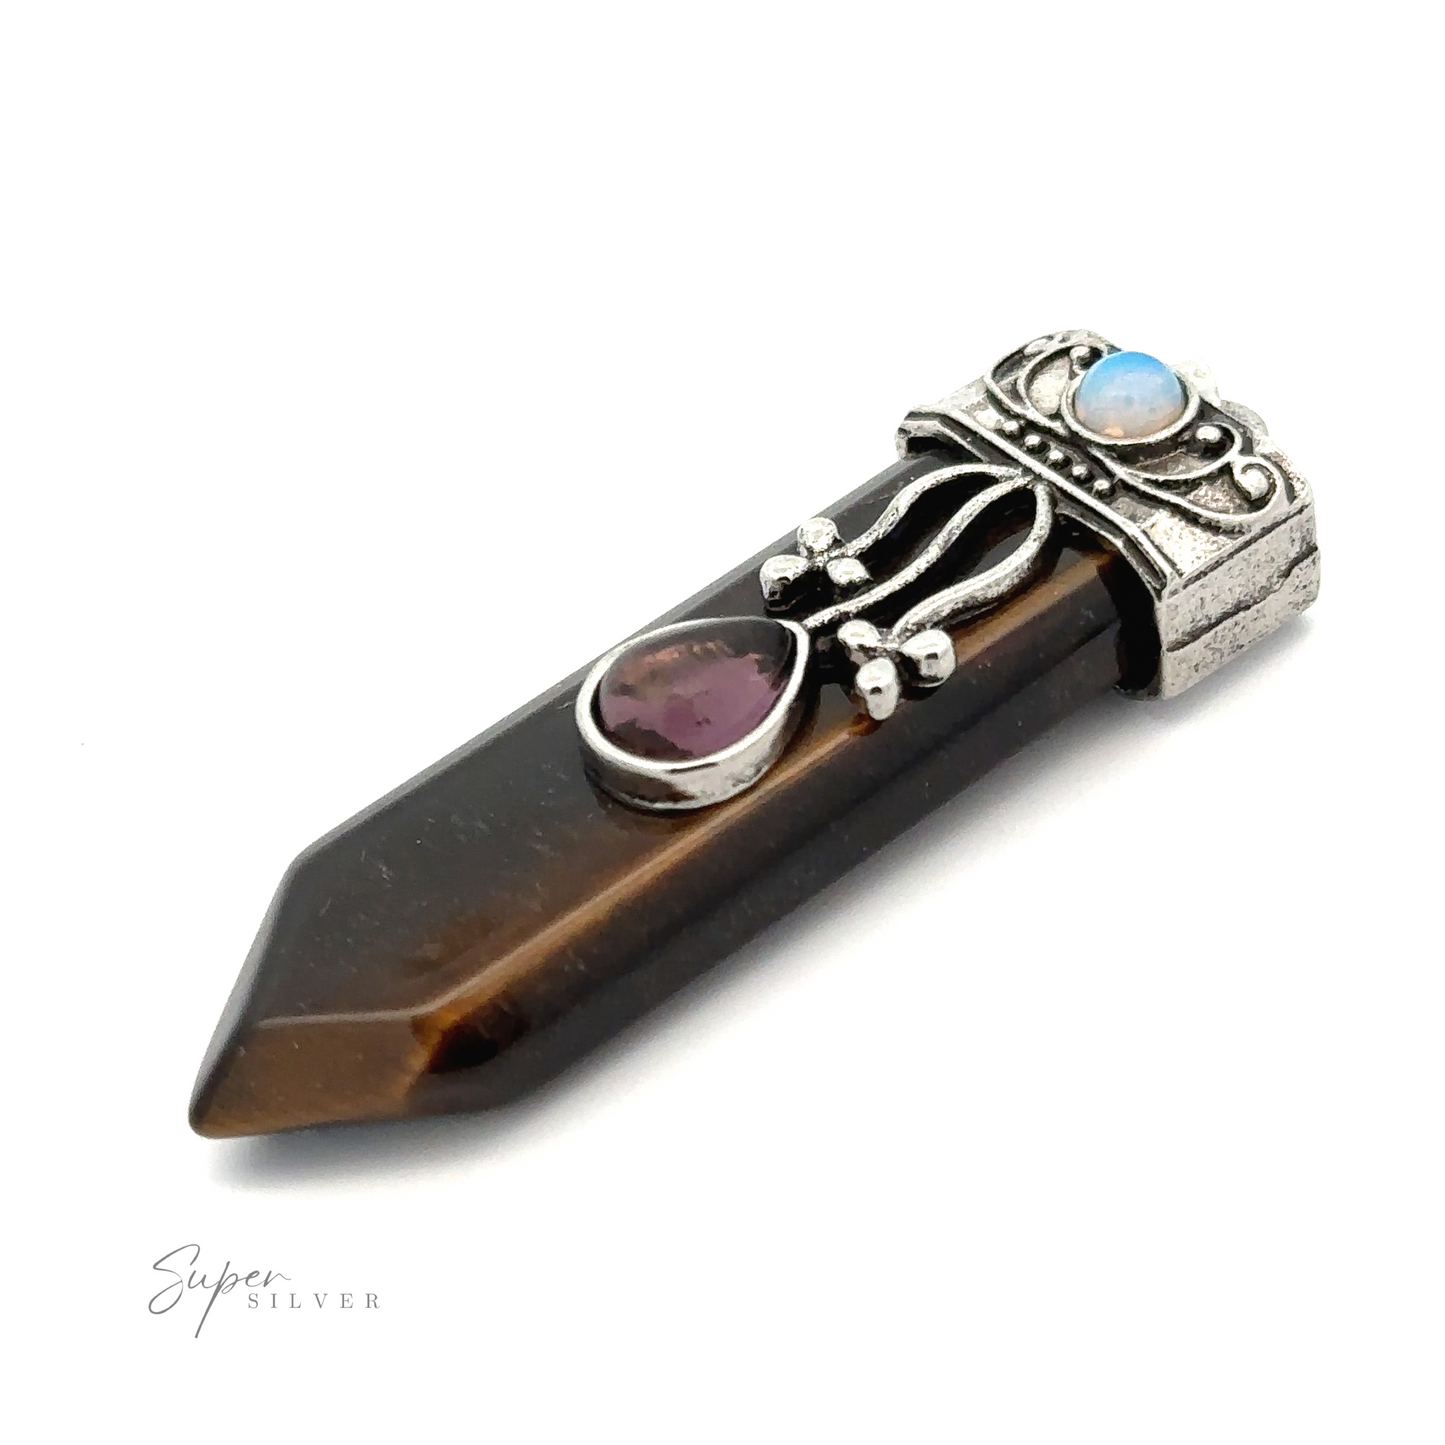 
                  
                    A decorative Obelisk Crystal Stone Pendant featuring a polished tiger's eye with a pointed end, adorned with a silver setting, a small attached amethyst gemstone, and an opalite stone on top.
                  
                